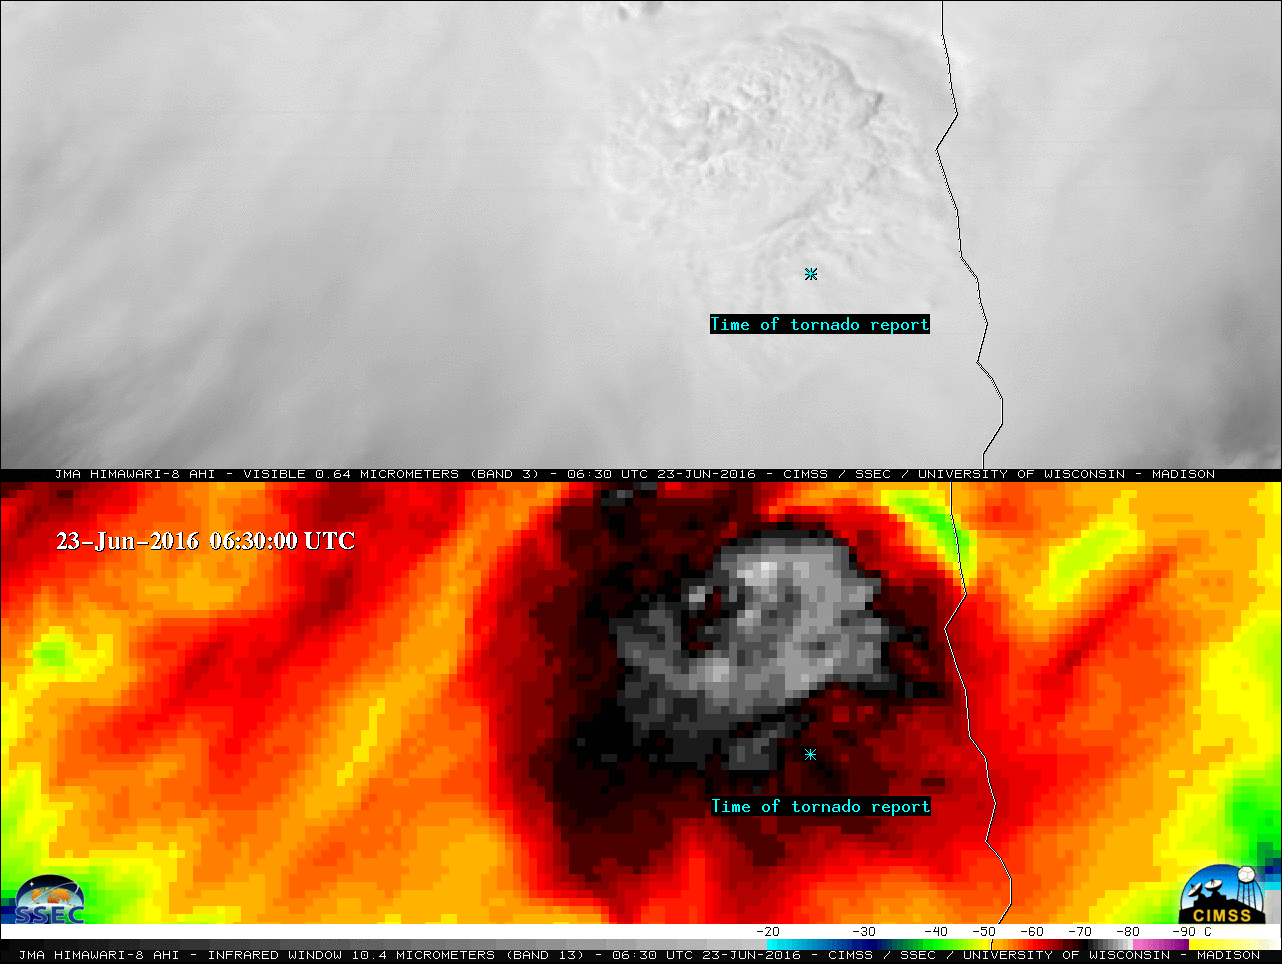 Himawari-8 0.64 µm Visible (top) and 10.4 µm Infrared Window (bottom) images [click to play animation]